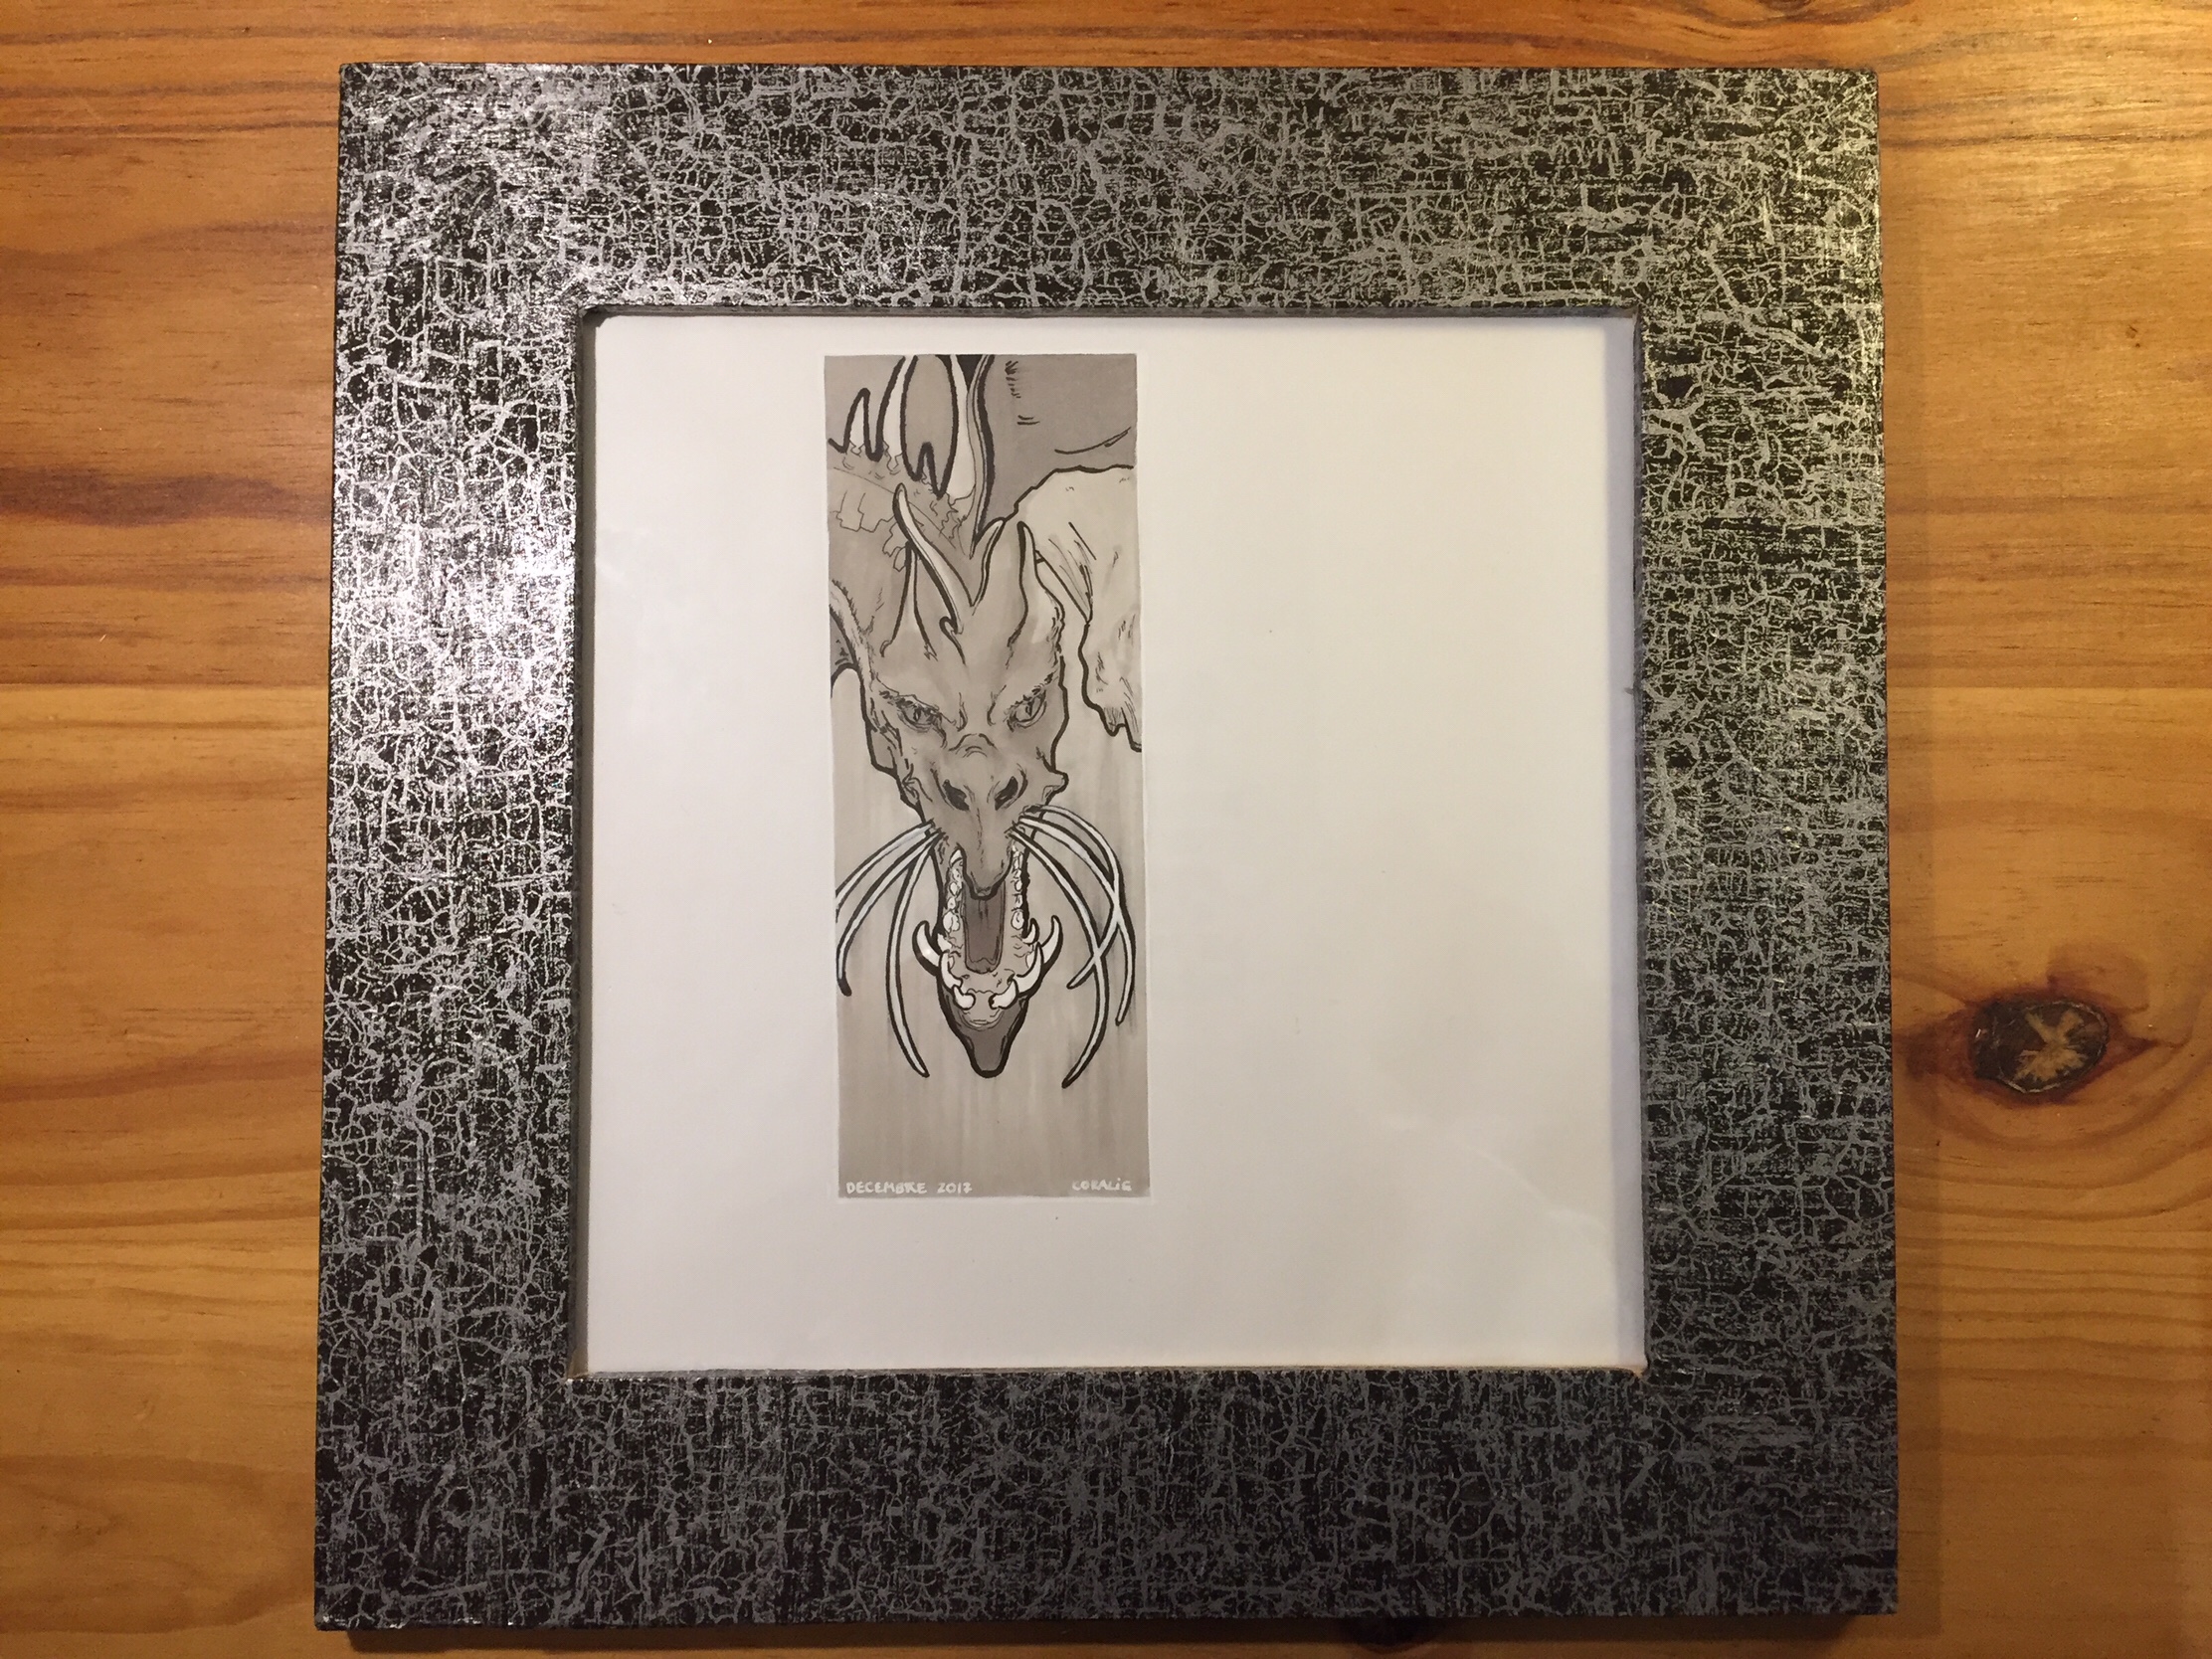 The finished piece: the dragon occupies the left half of a square white sheet of paper. The square frame is adorned with silver and black metallic paper.